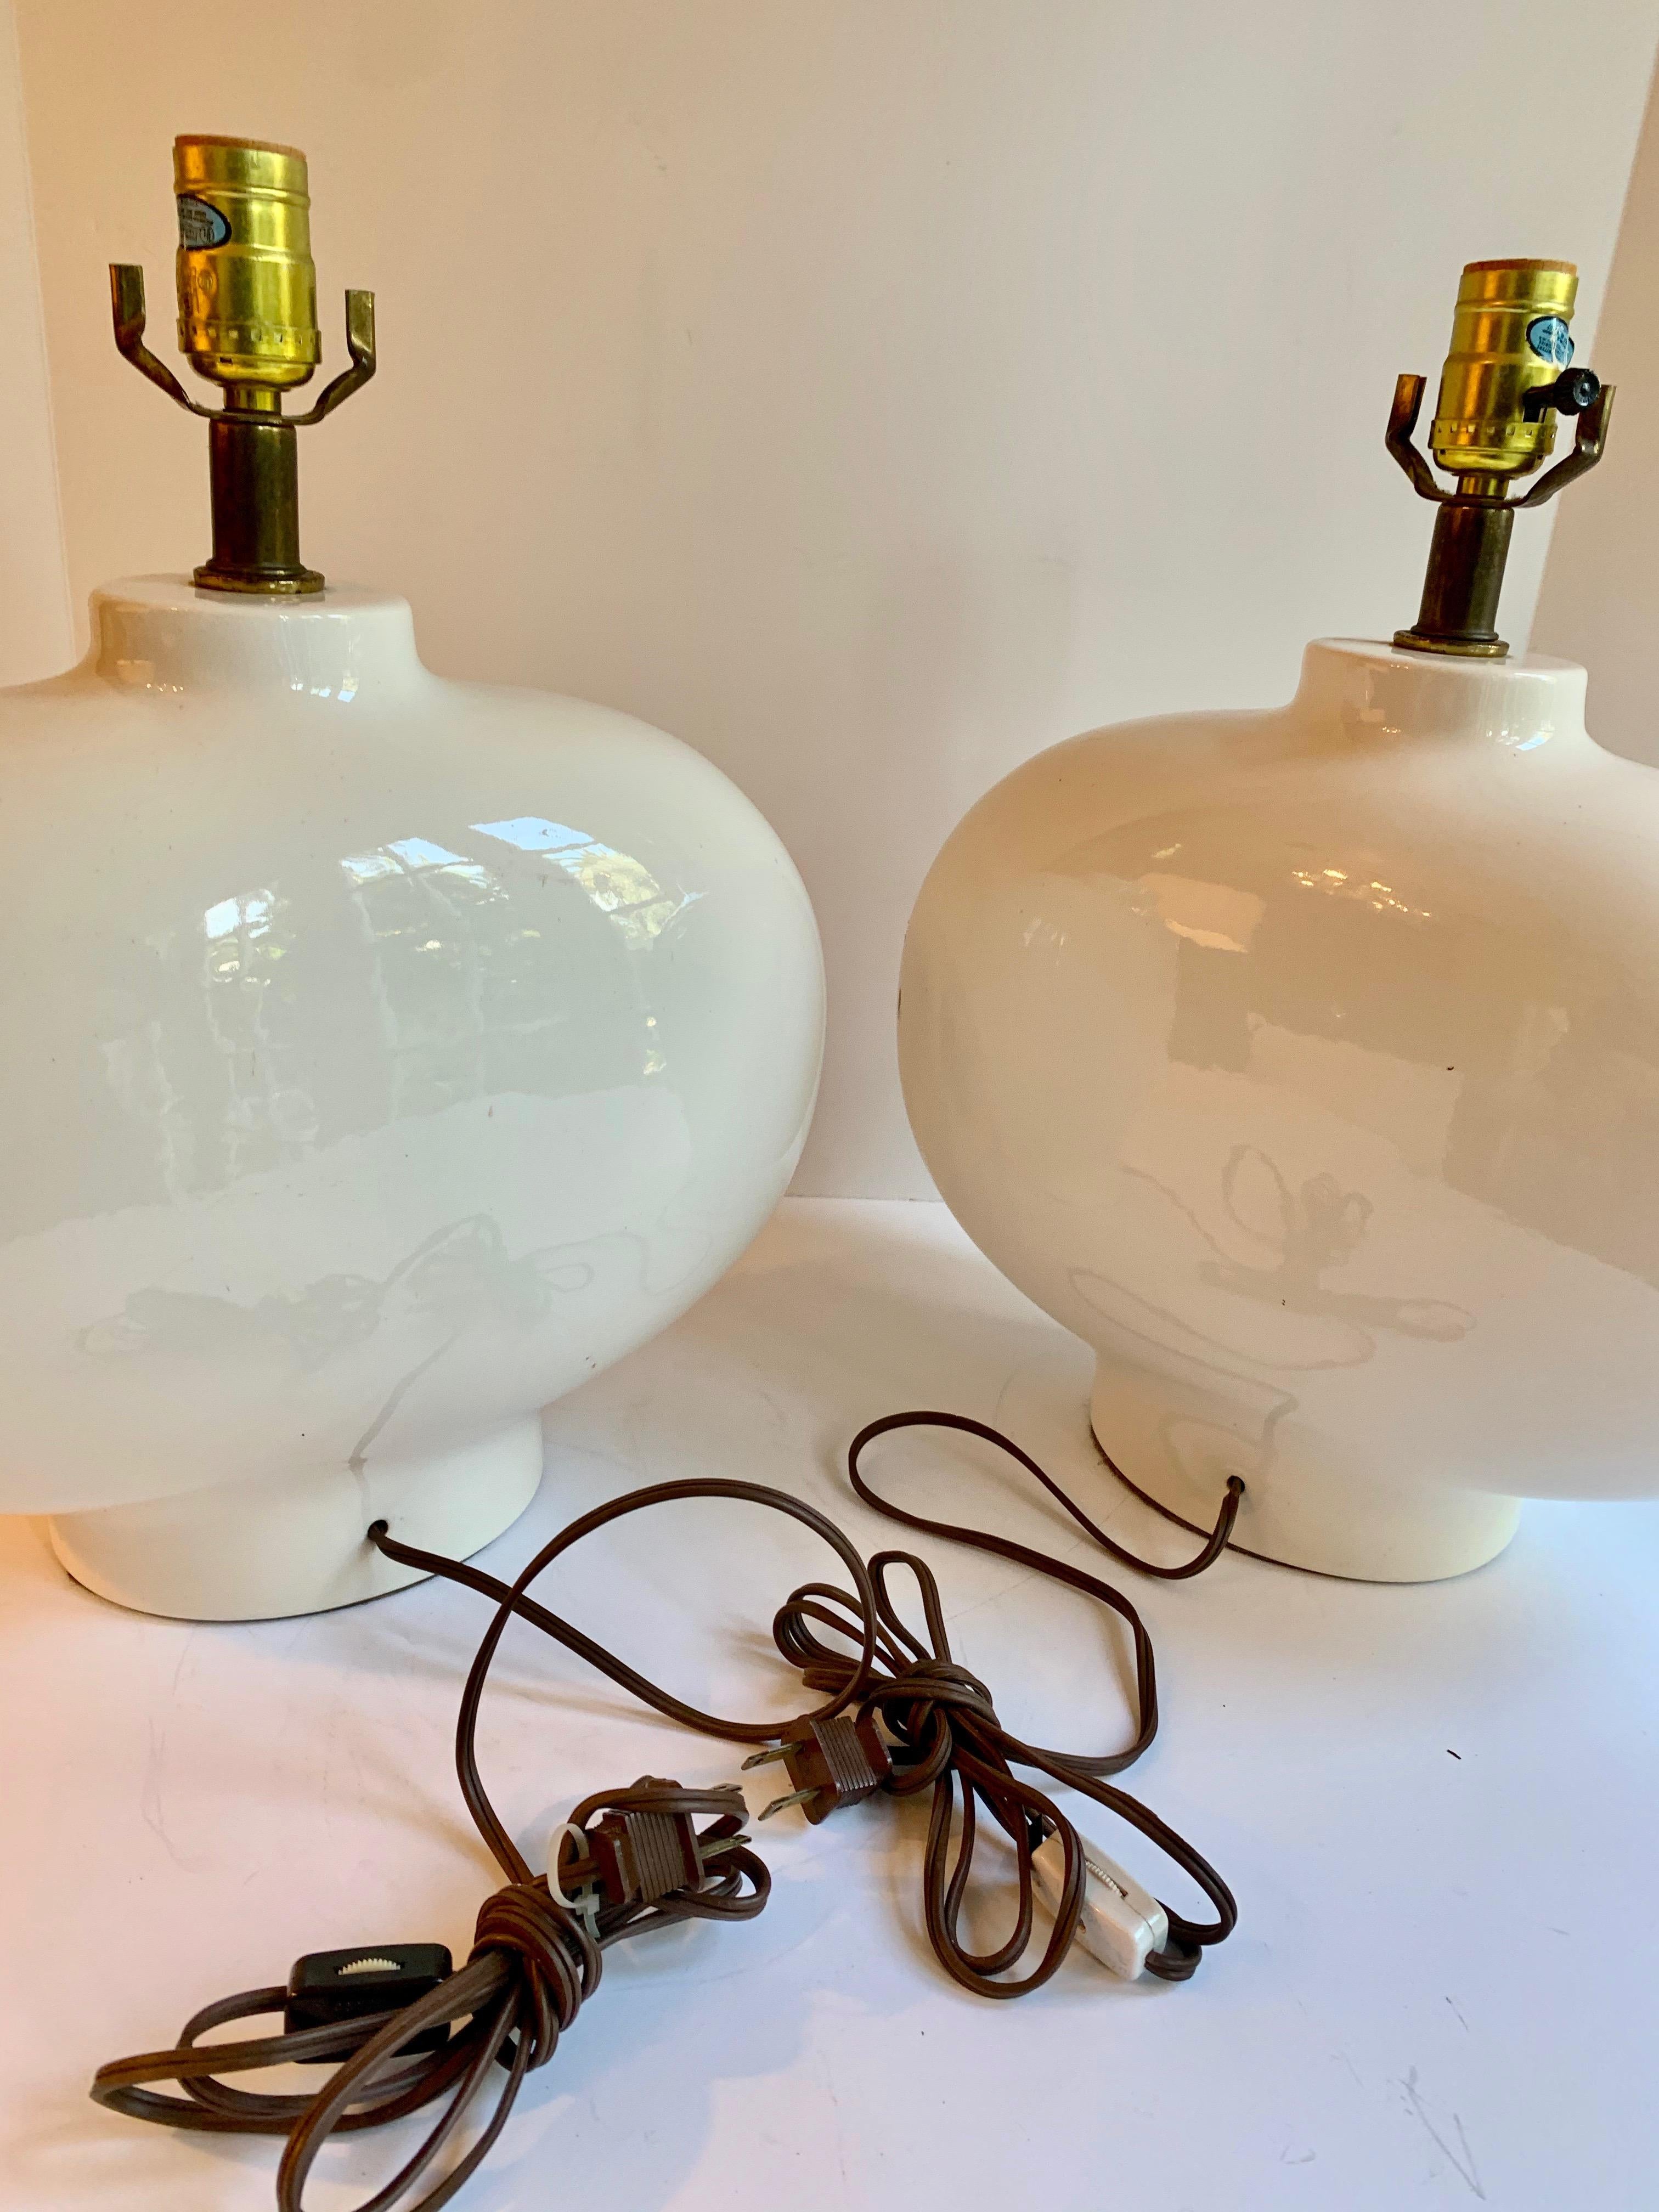 Simple, yet wonderful pair of oval ceramic table lamps - original wiring with a switch on the cord or at the socket. Shades not included.